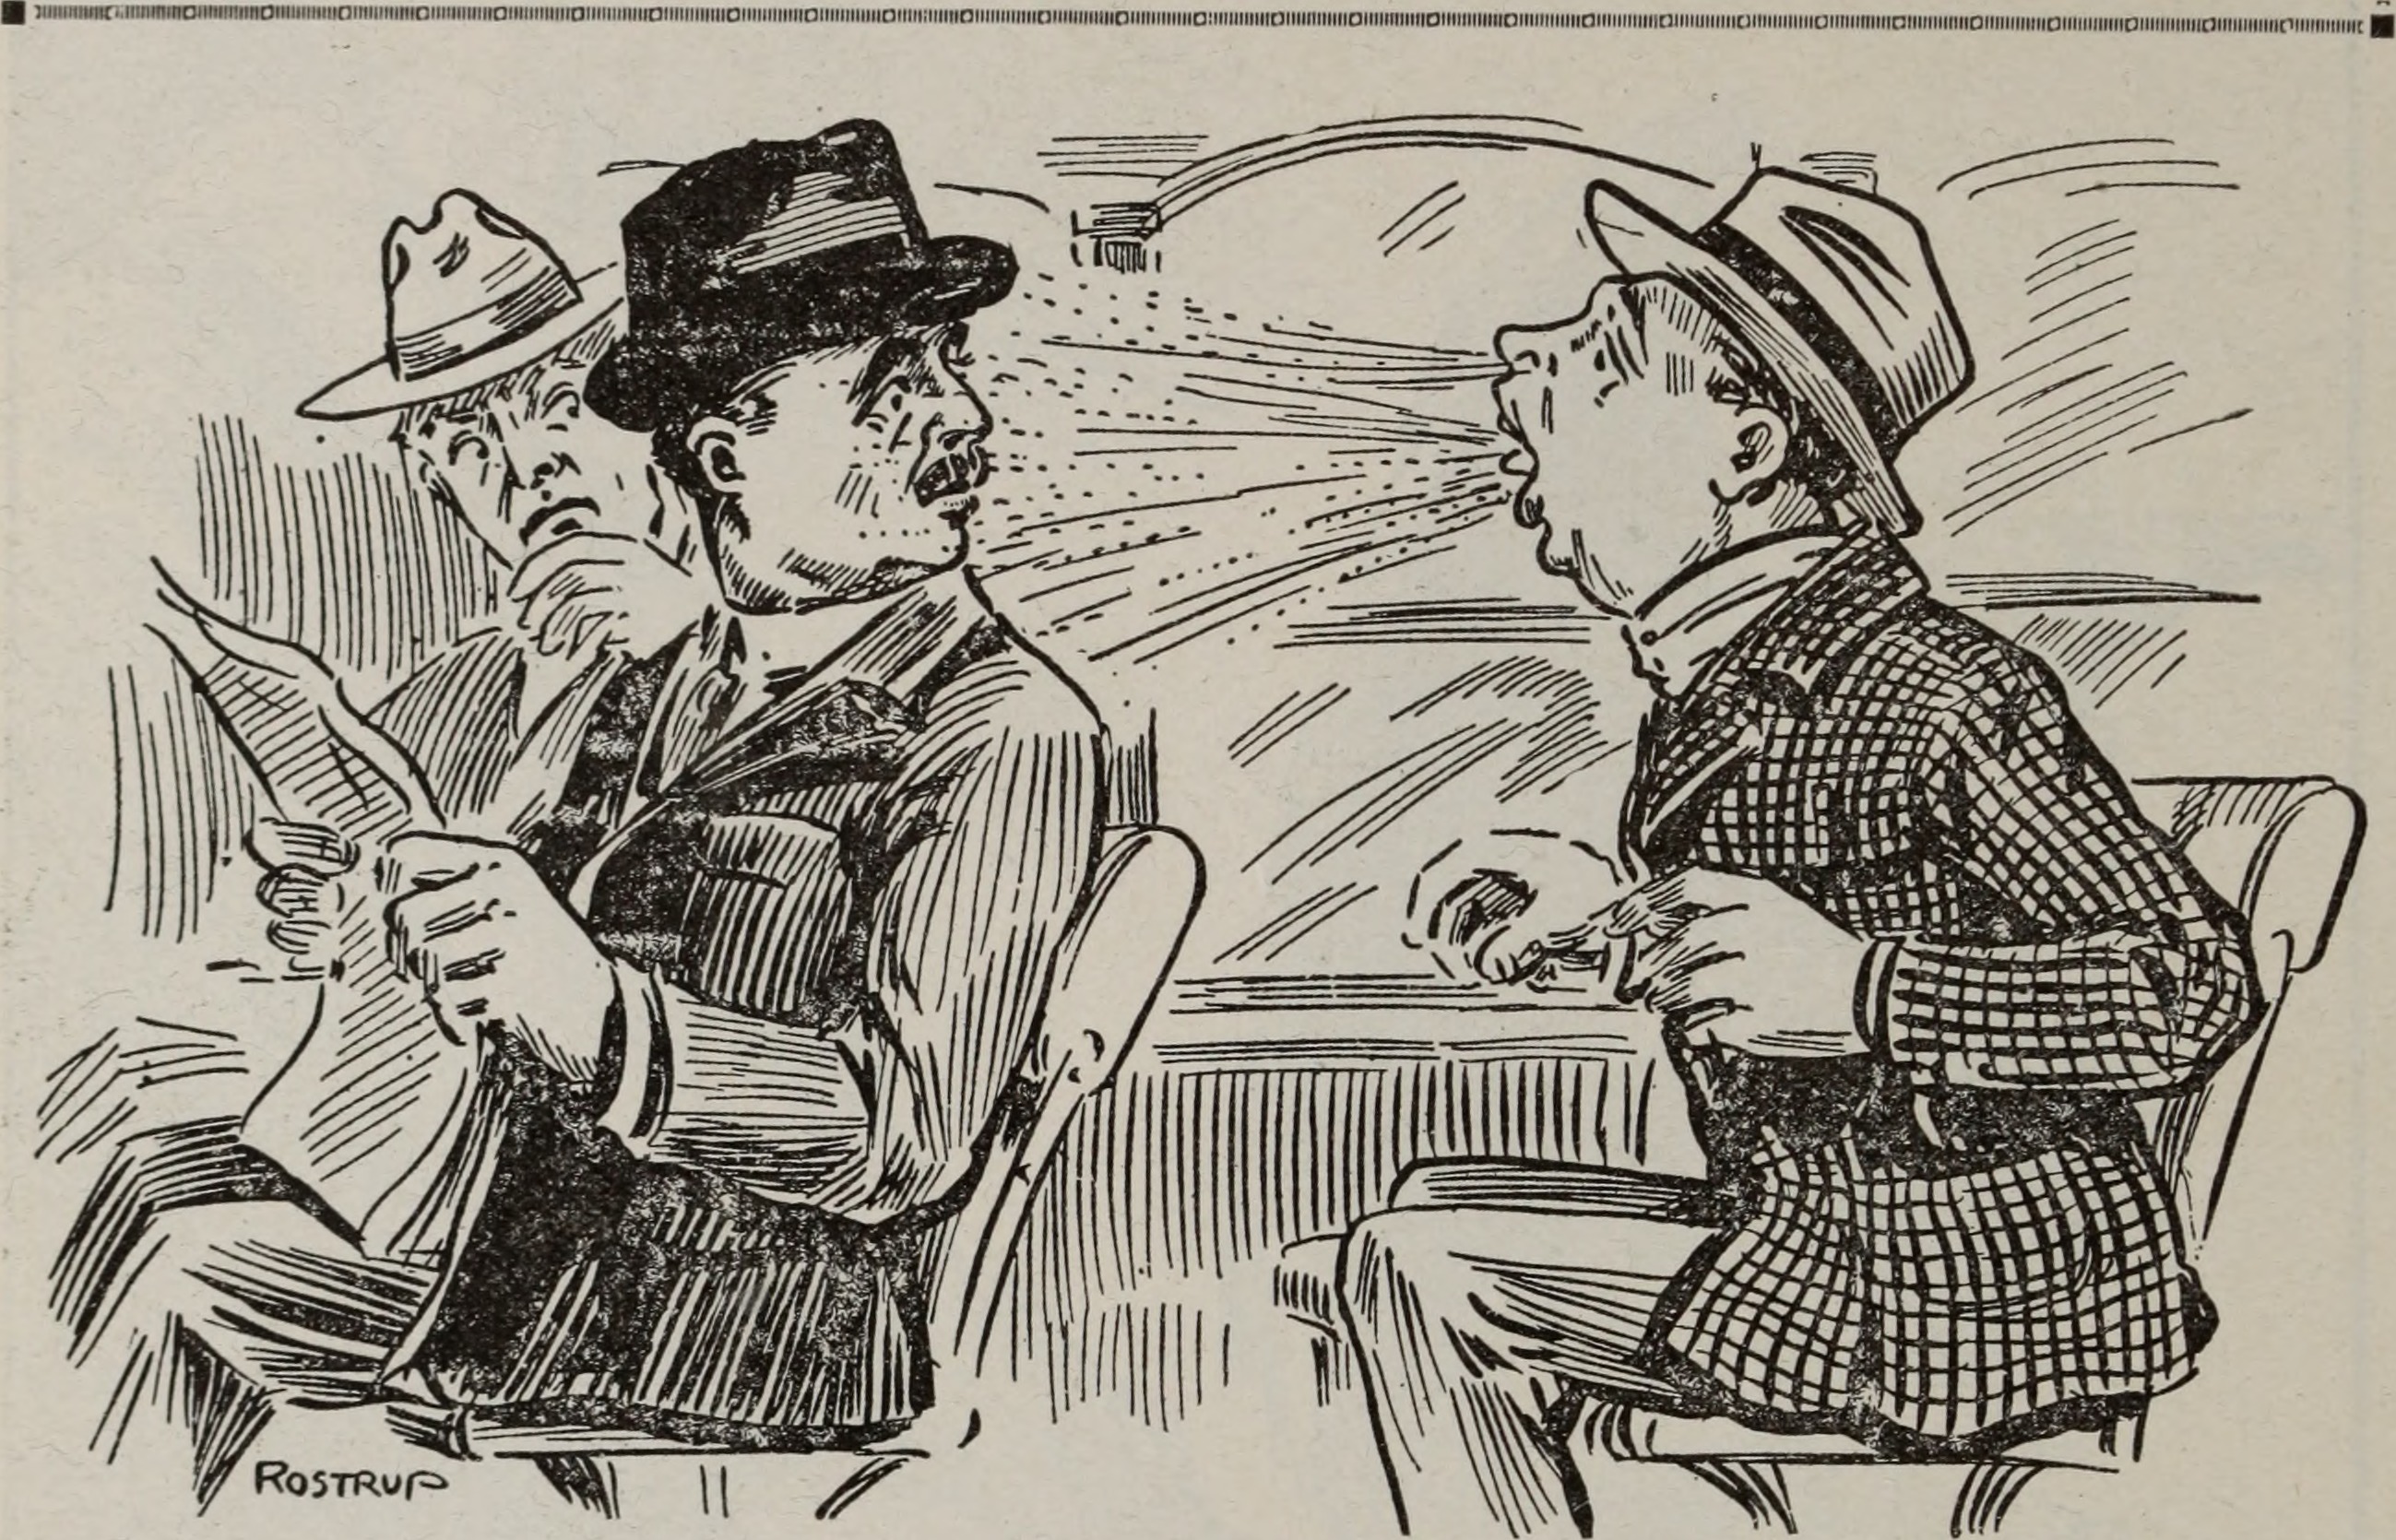 A cartoon of a man sneezing, blowing droplets of liquid into another man's face.